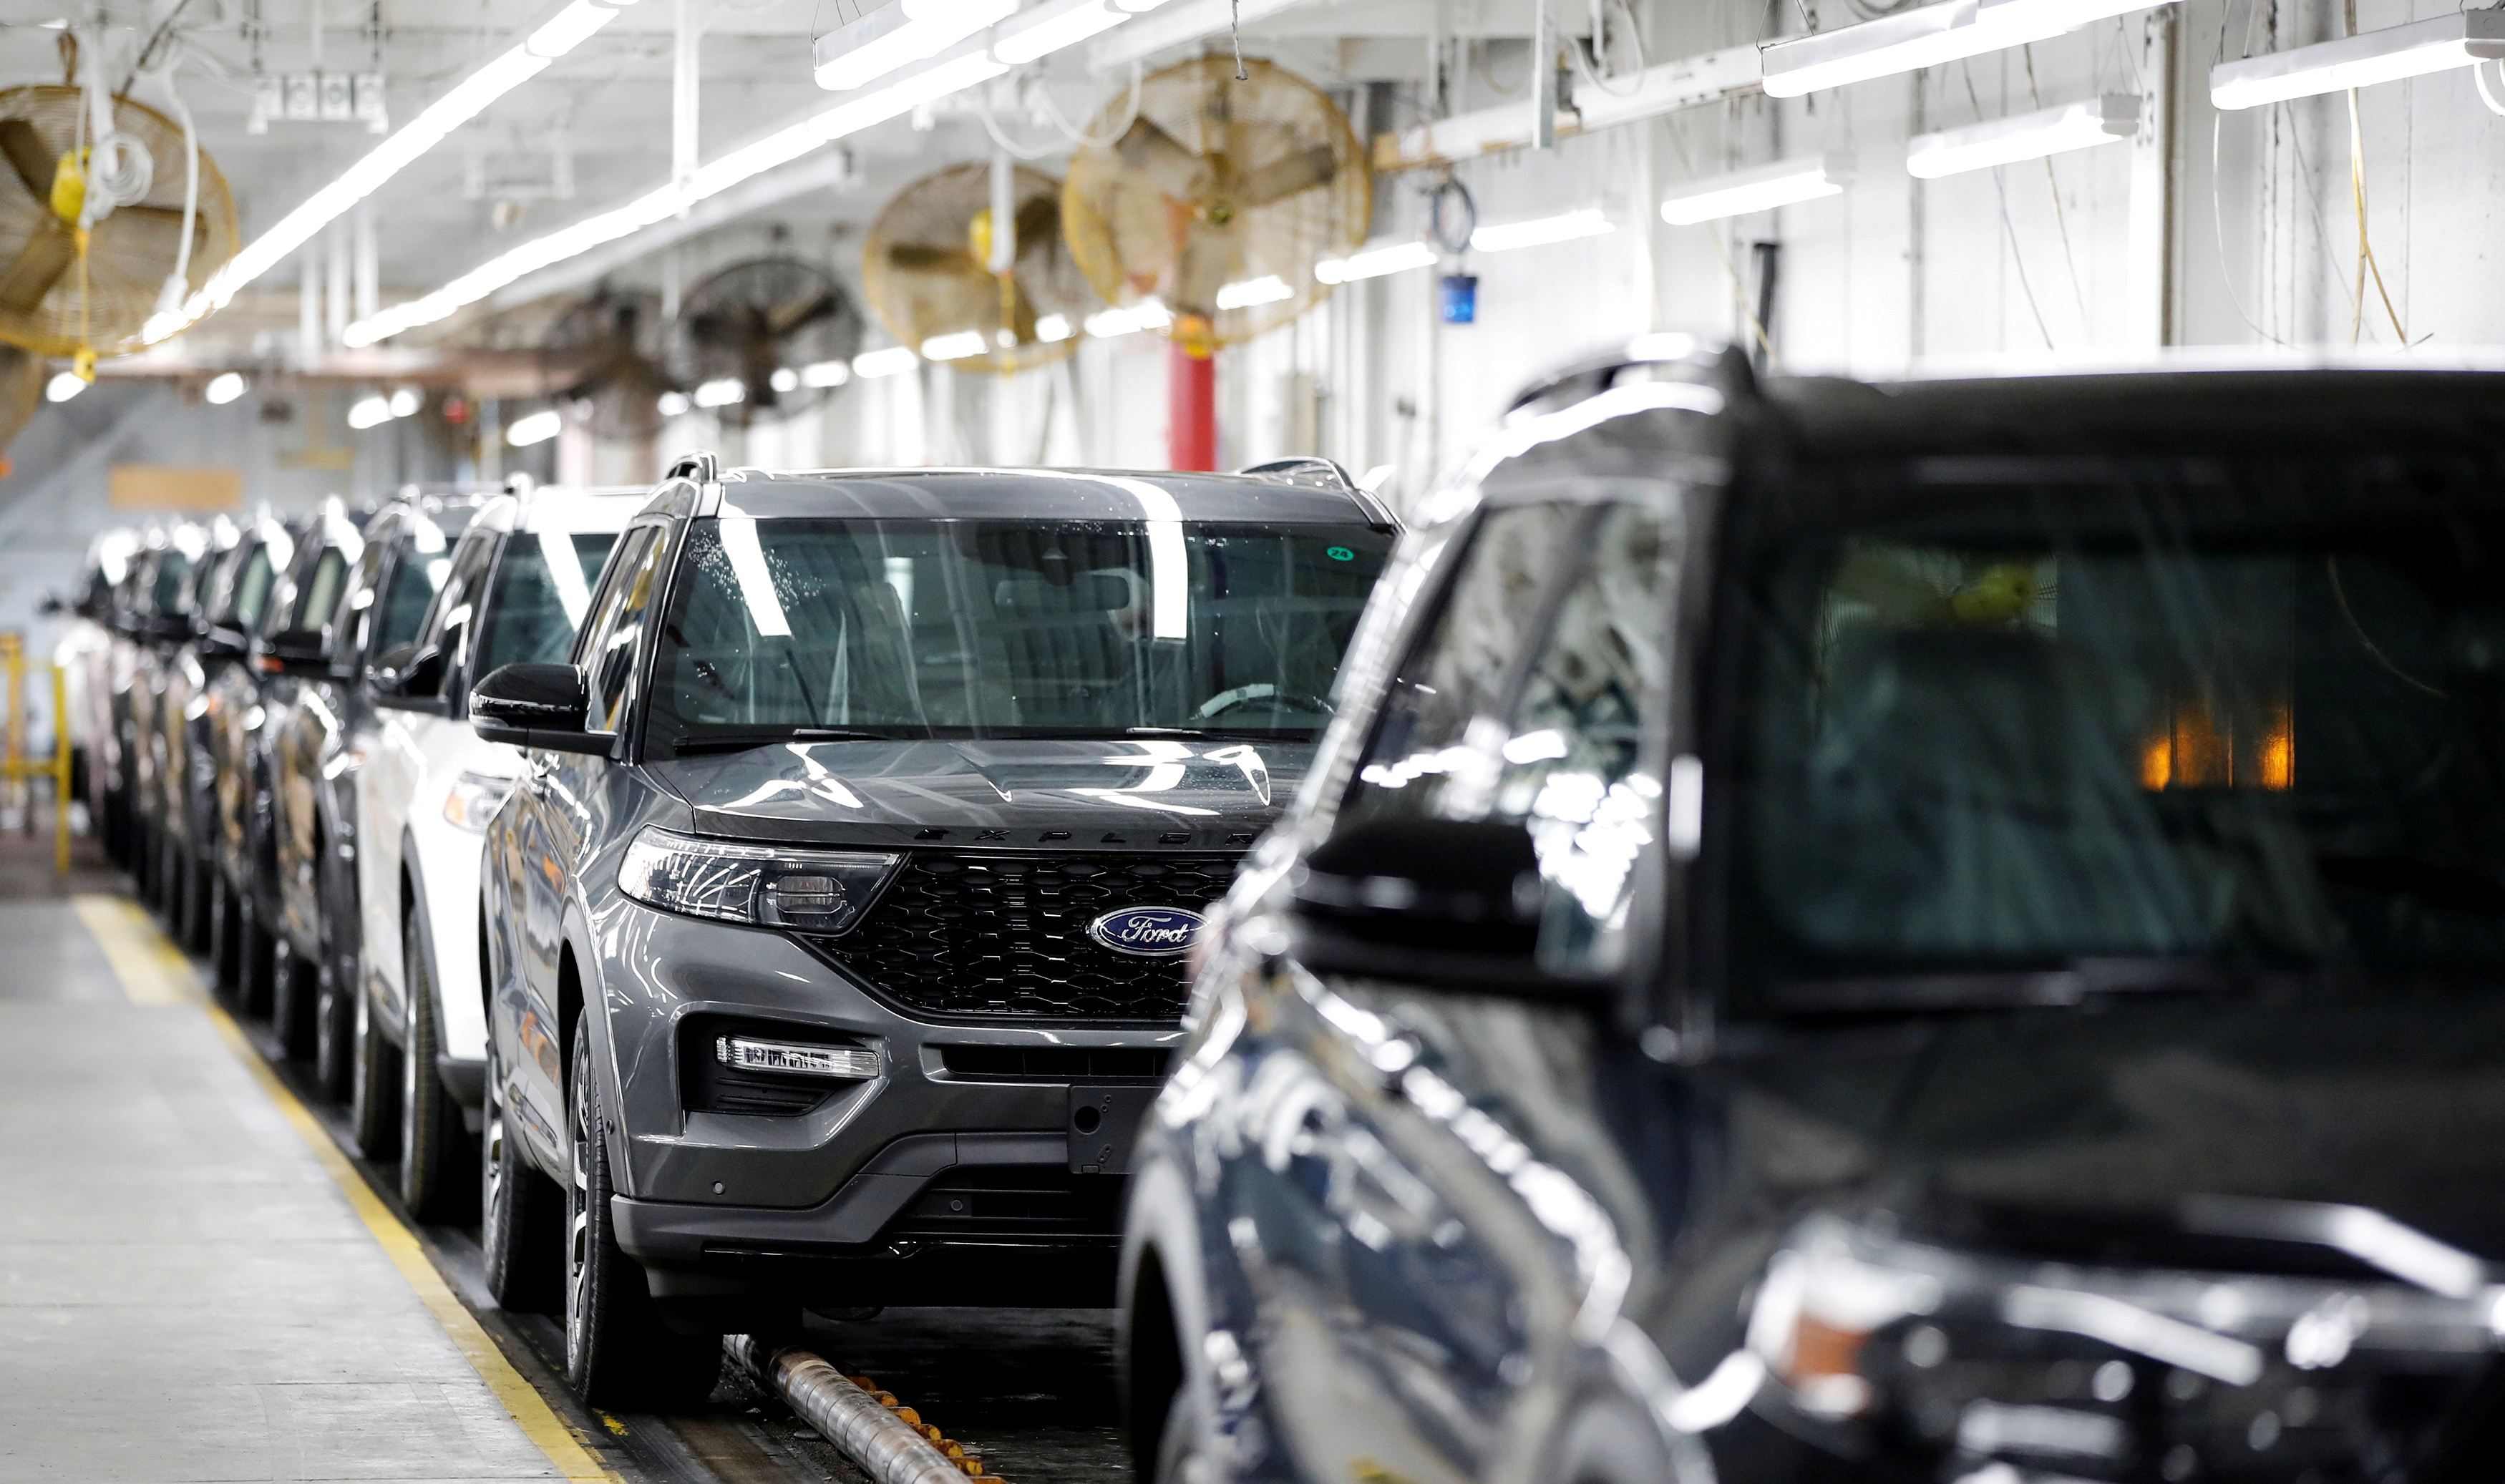 2020 Ford Explorer cars are seen at Ford's Chicago Assembly Plant in Chicago, Illinois, U.S. June 24, 2019. REUTERS/Kamil Krzaczynski/File Photo